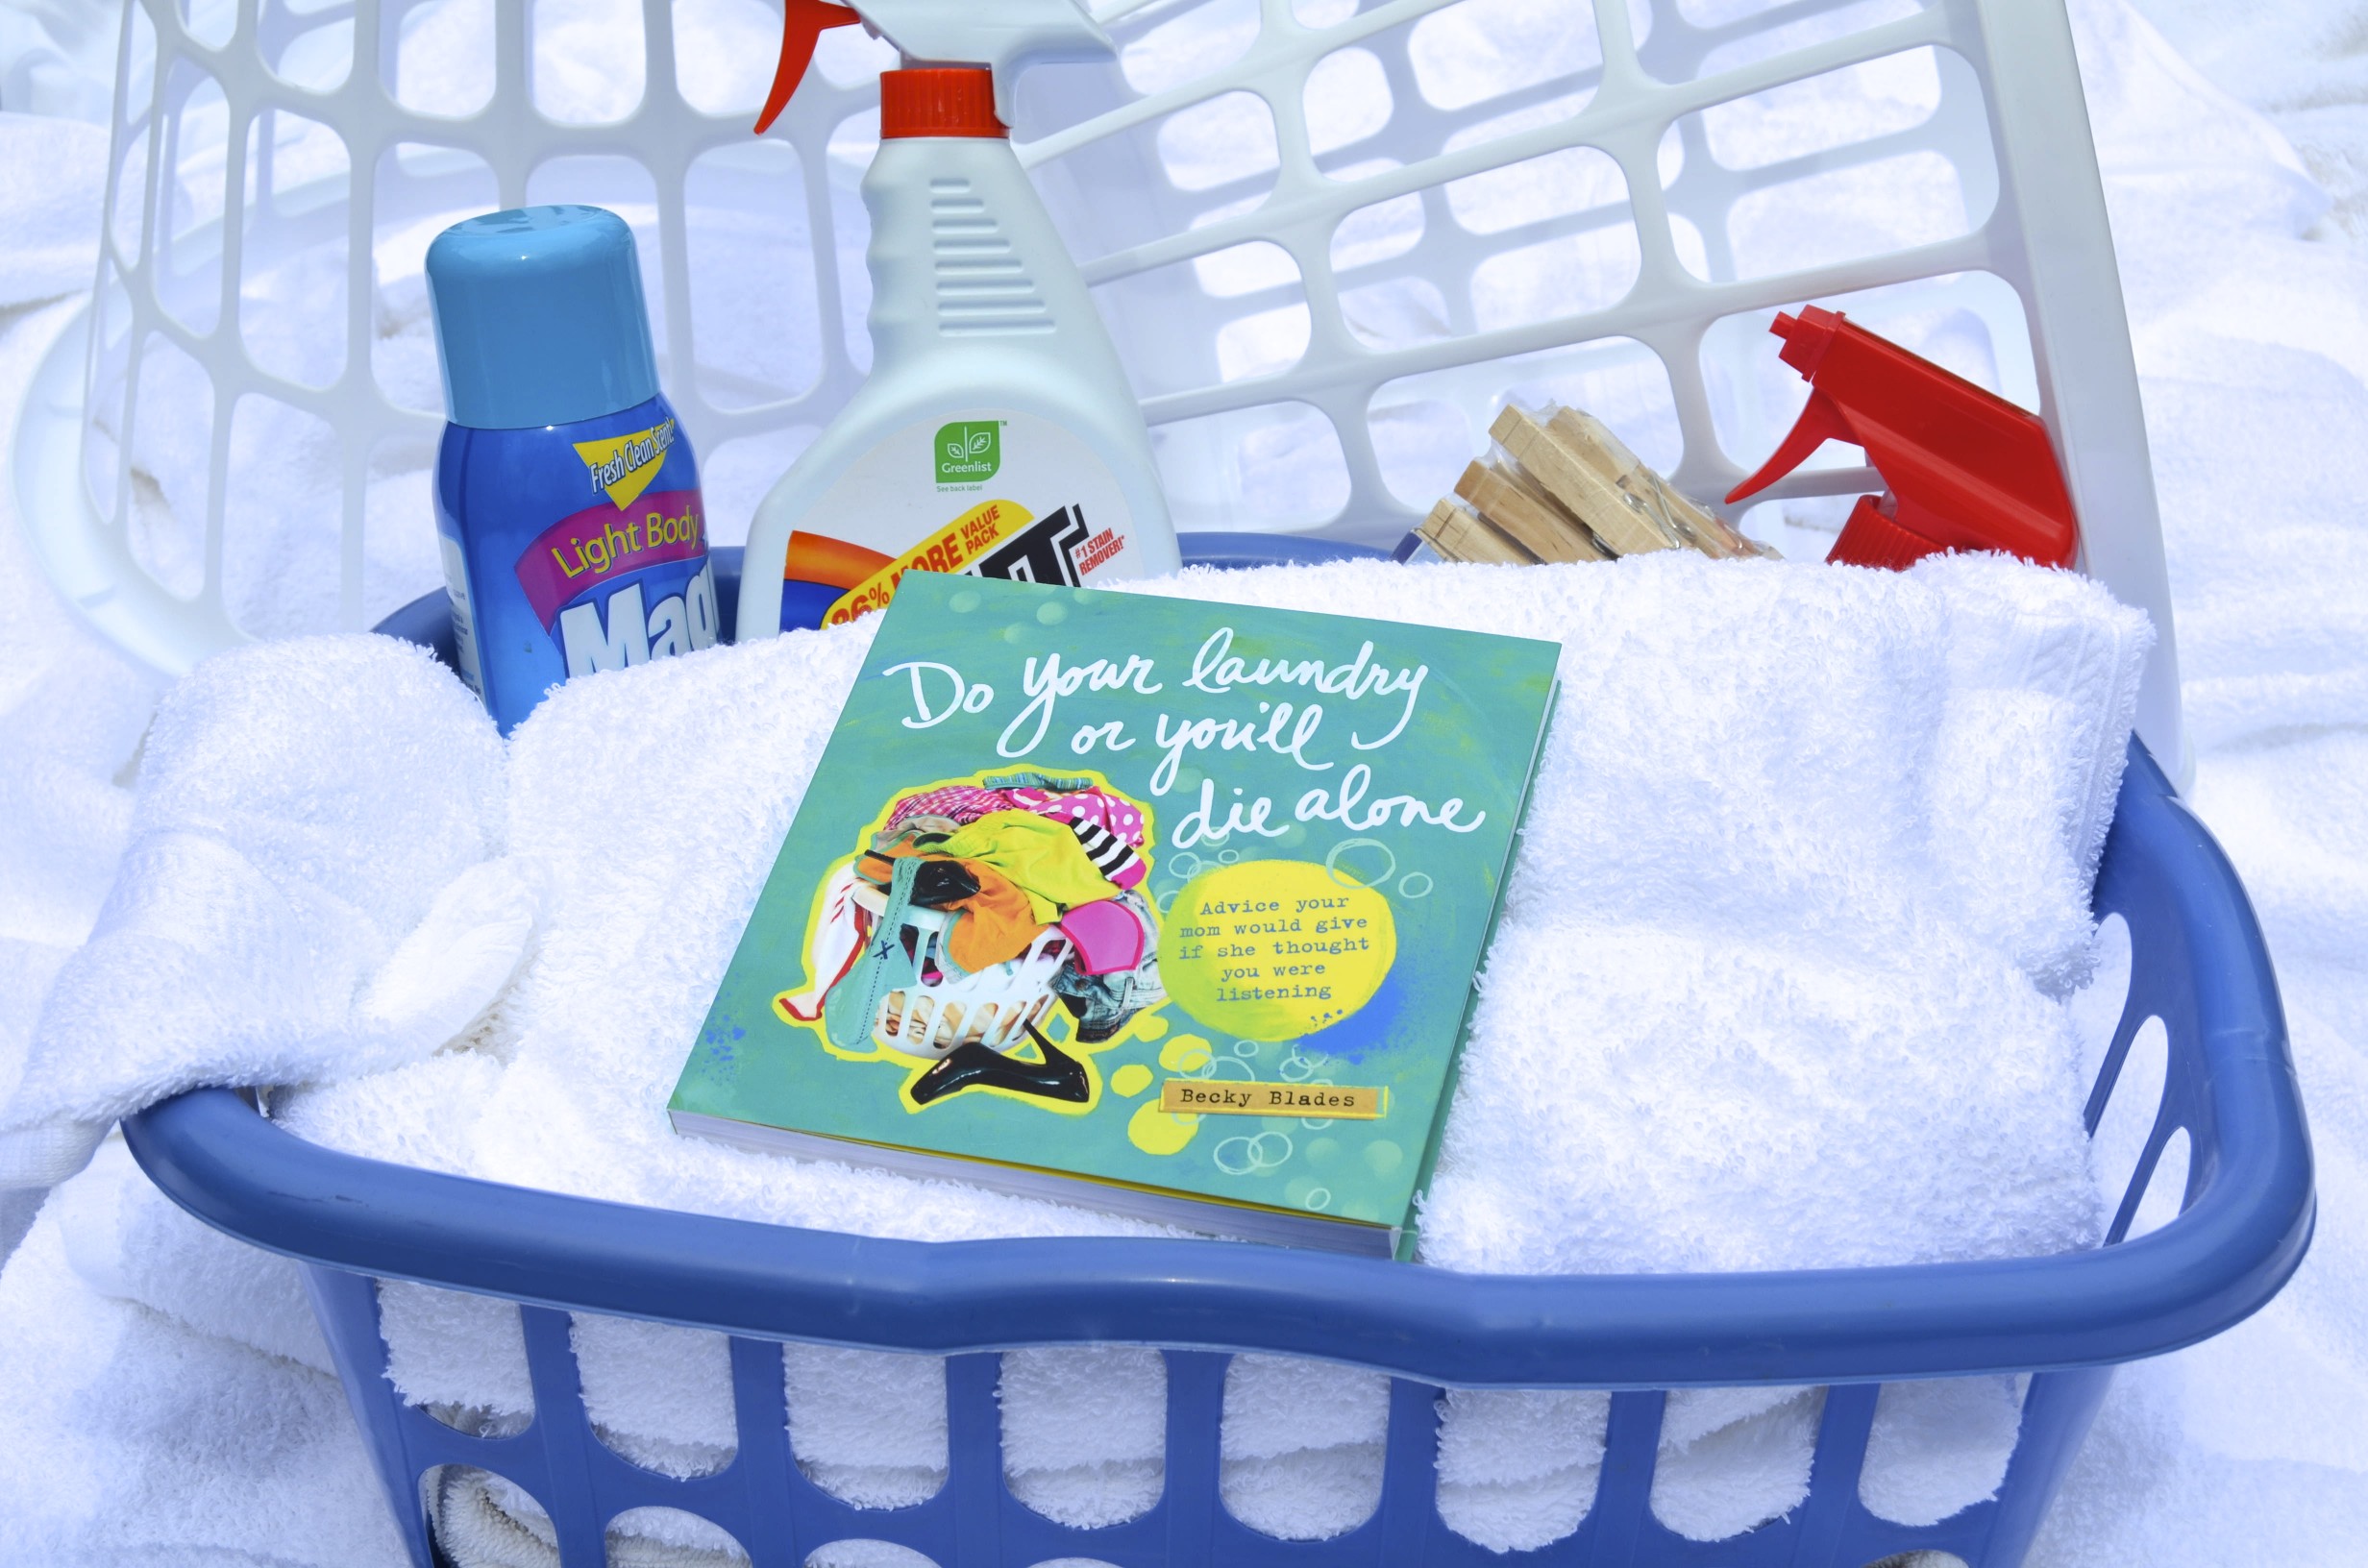 do your laundry or you'll die alone book in laundry basket